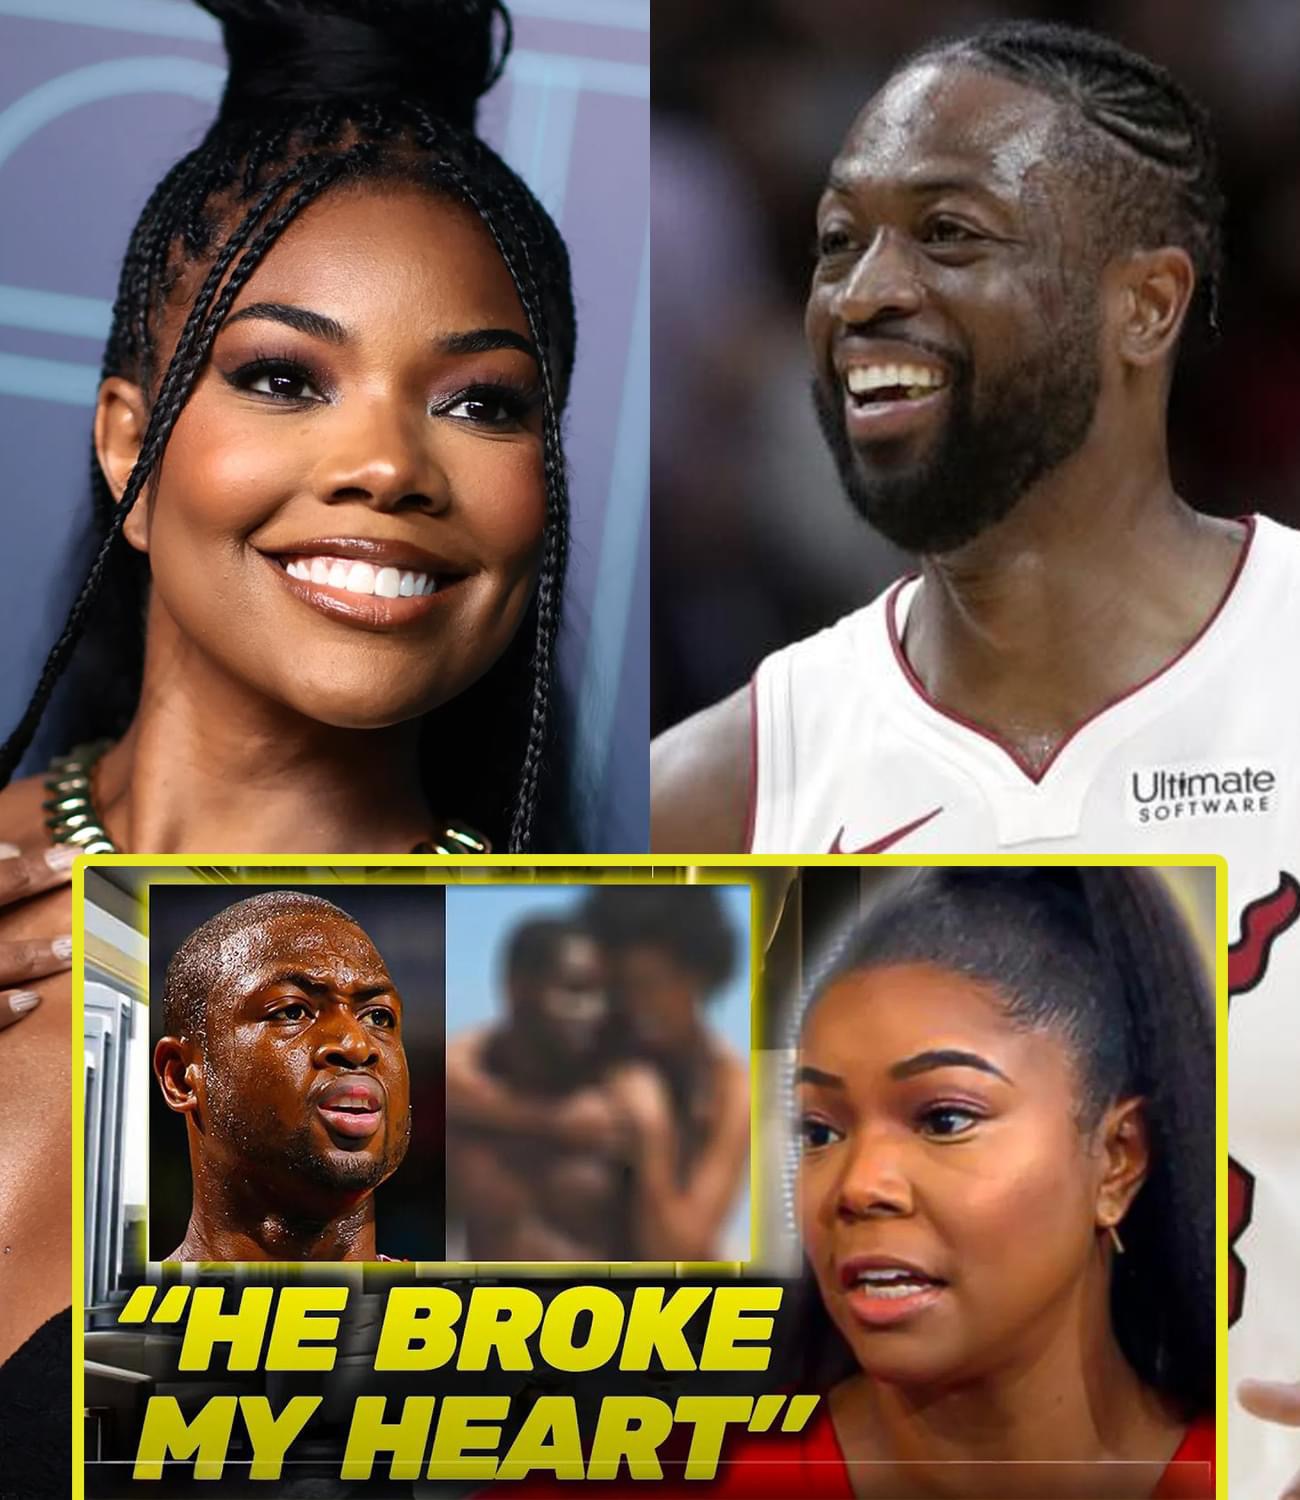 Gabrielle Union CONFIRMS DIVORCE After Pictures of Dwyane Wade with Other Women are Leaked